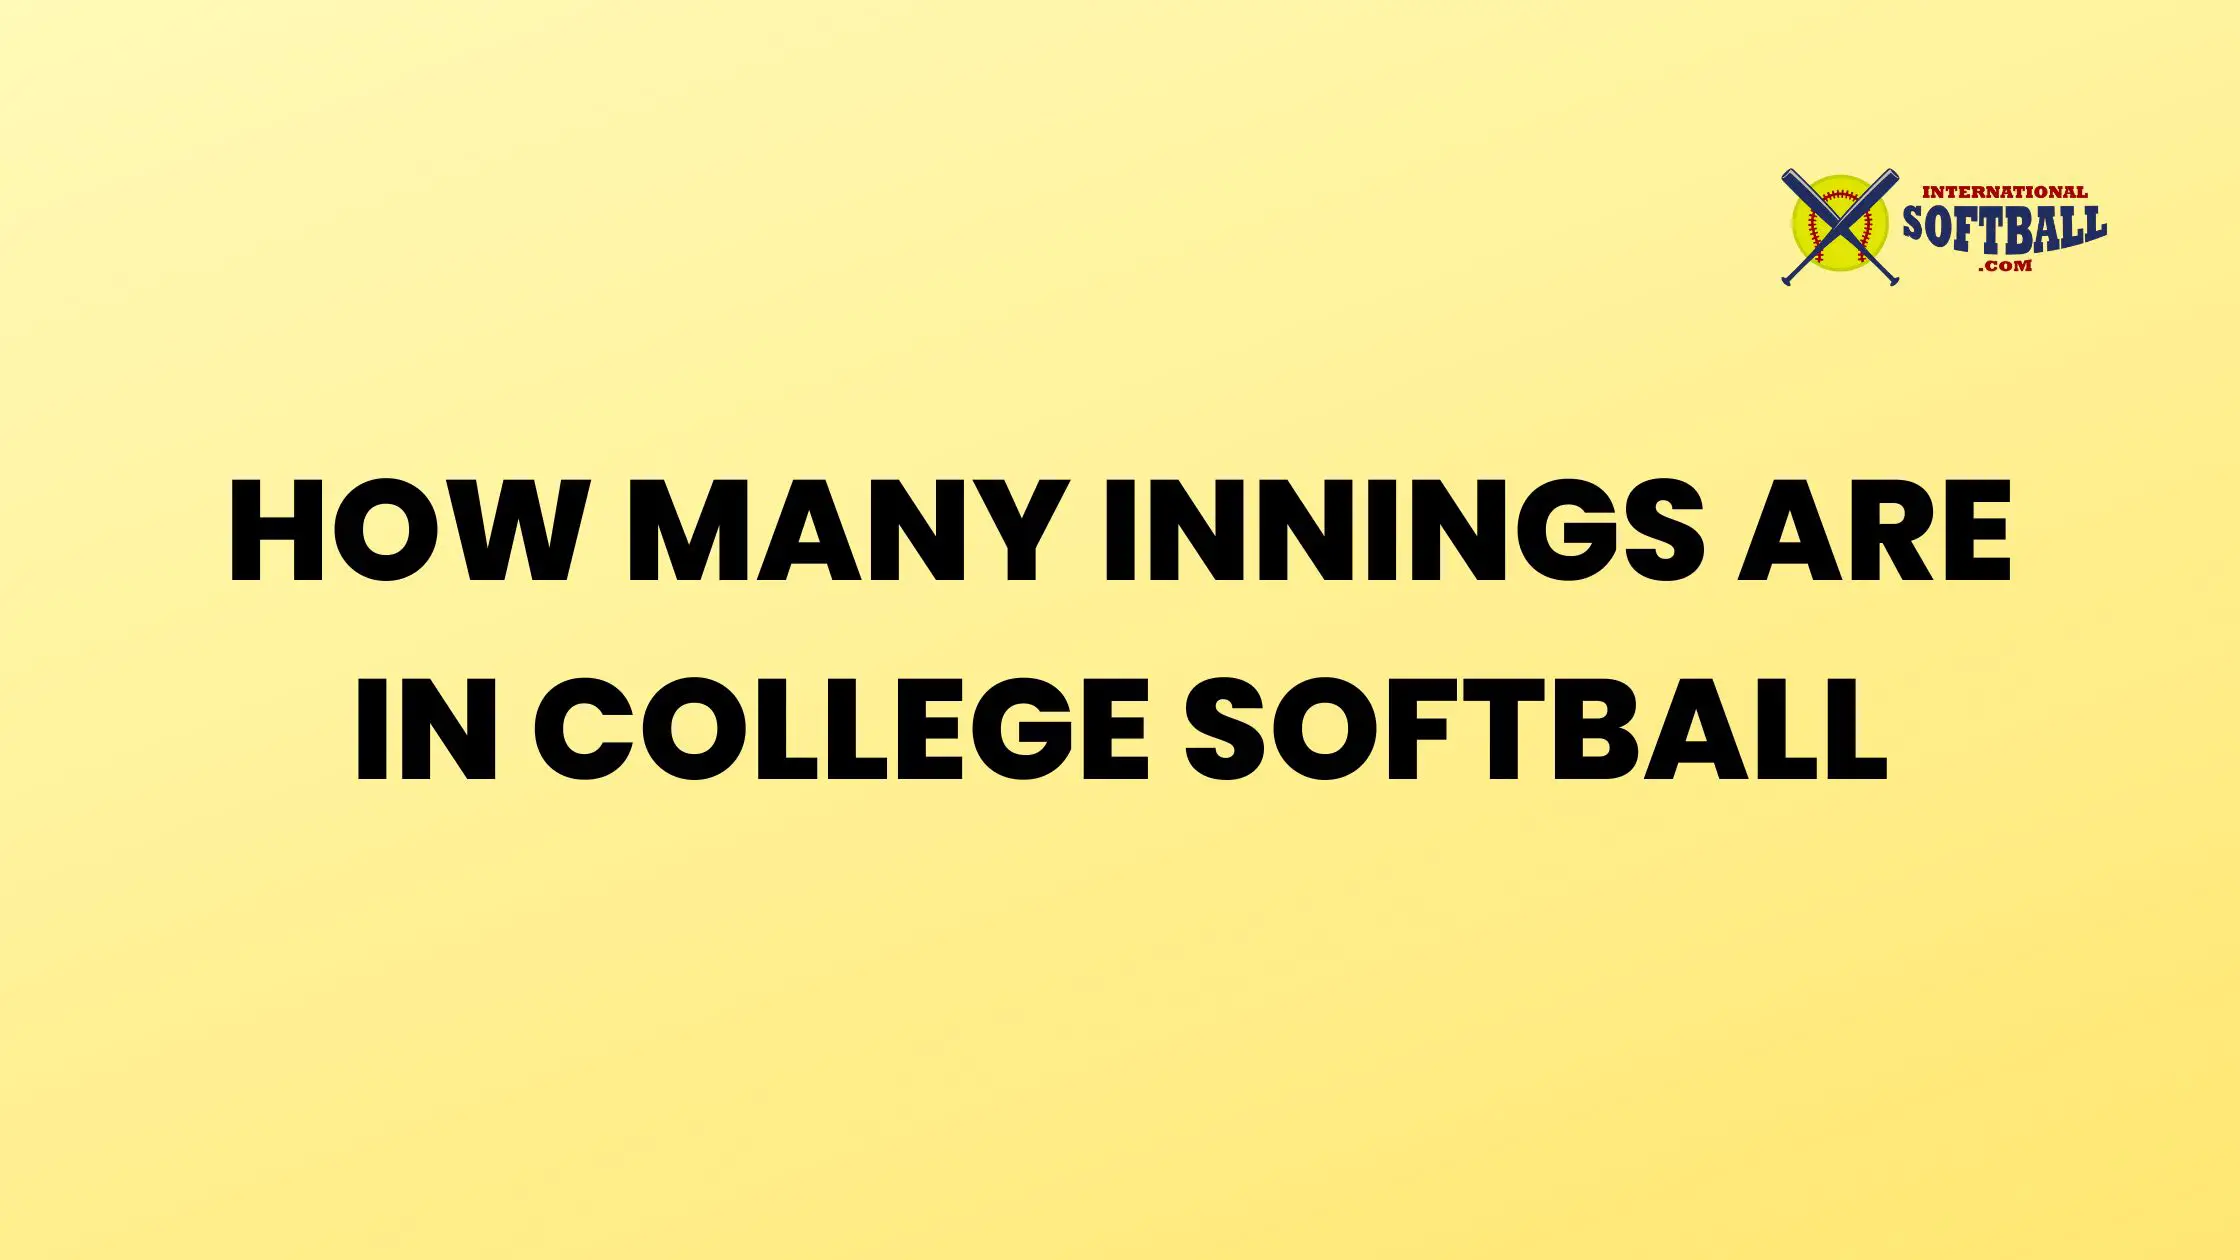 HOW MANY INNINGS ARE IN COLLEGE SOFTBALL